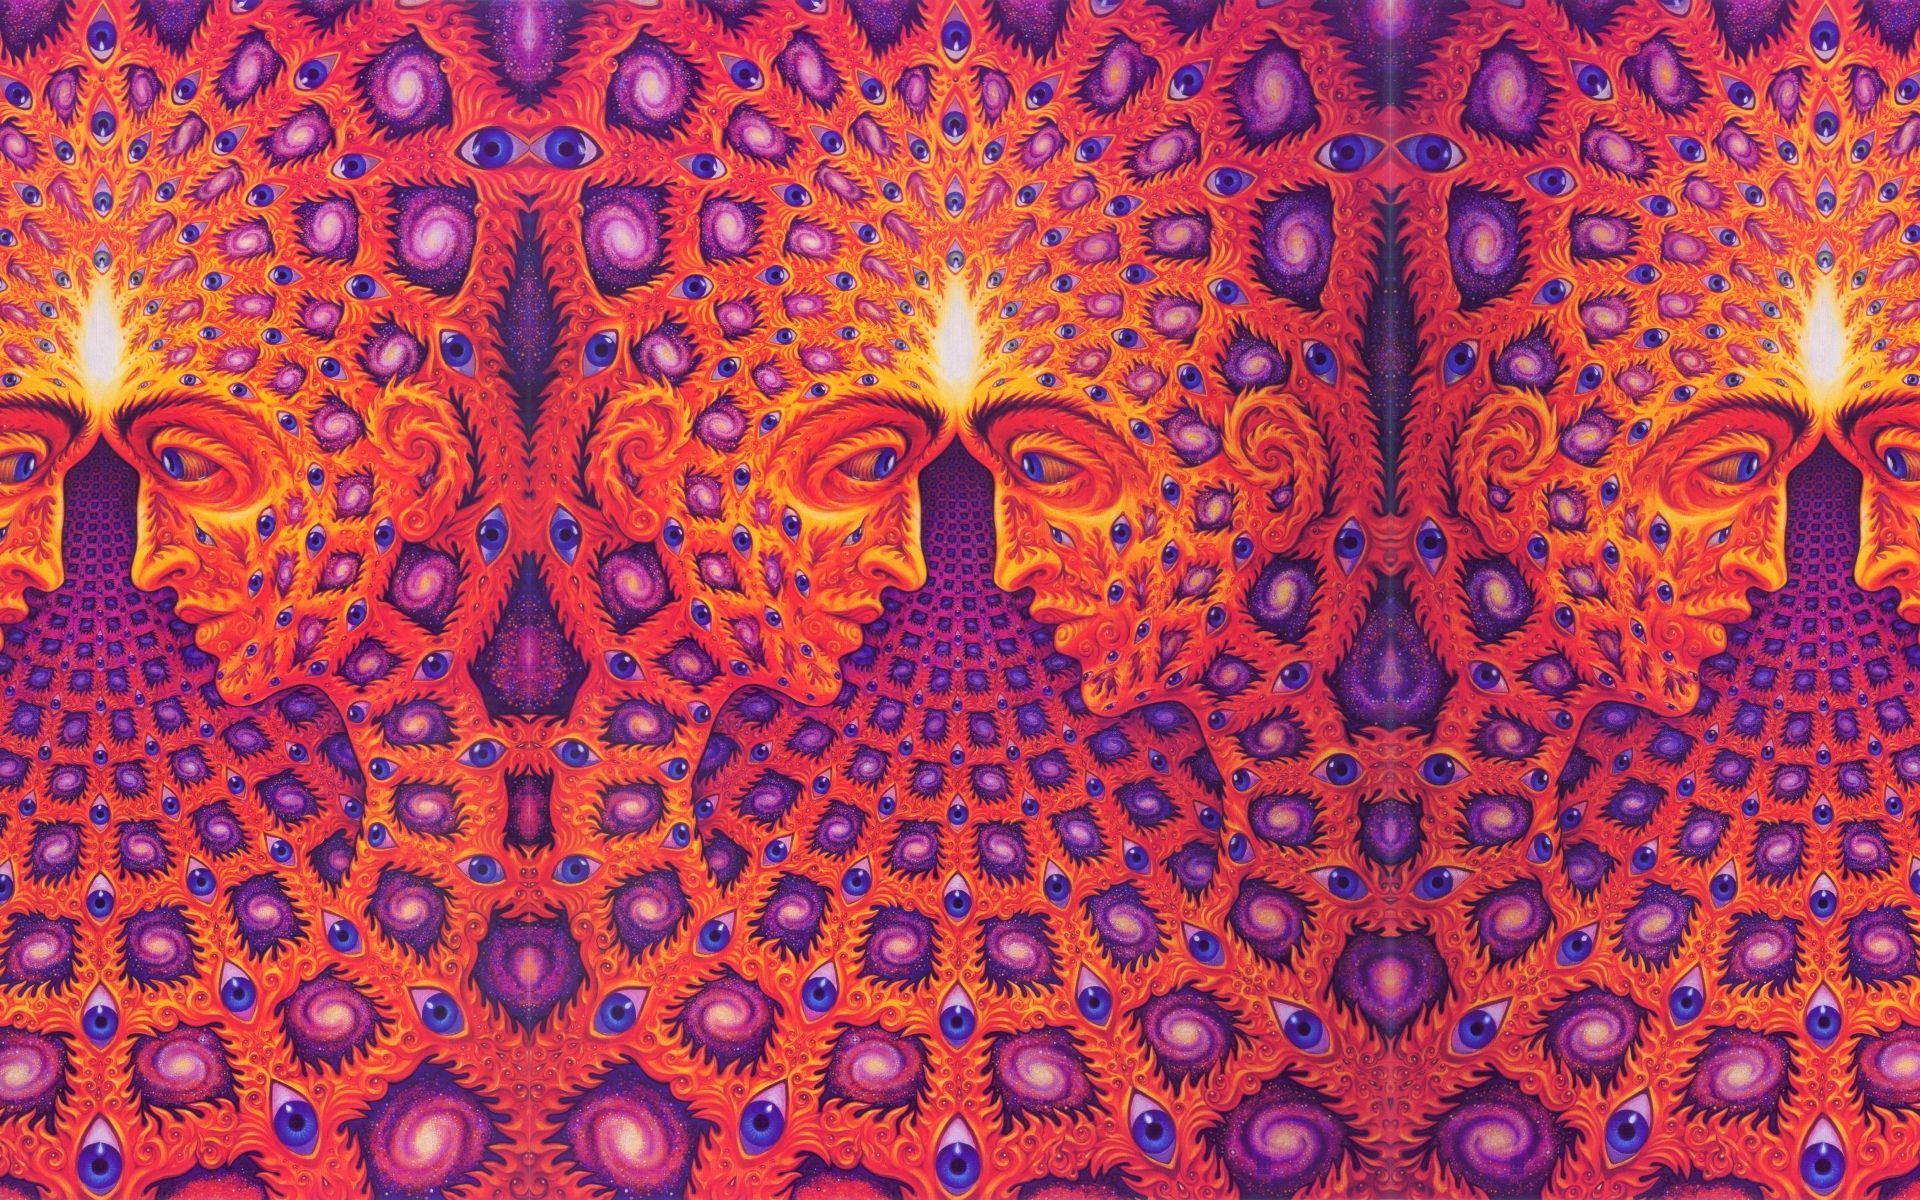 Psychedelic Wallpaper | 1920x1200 | ID:56041